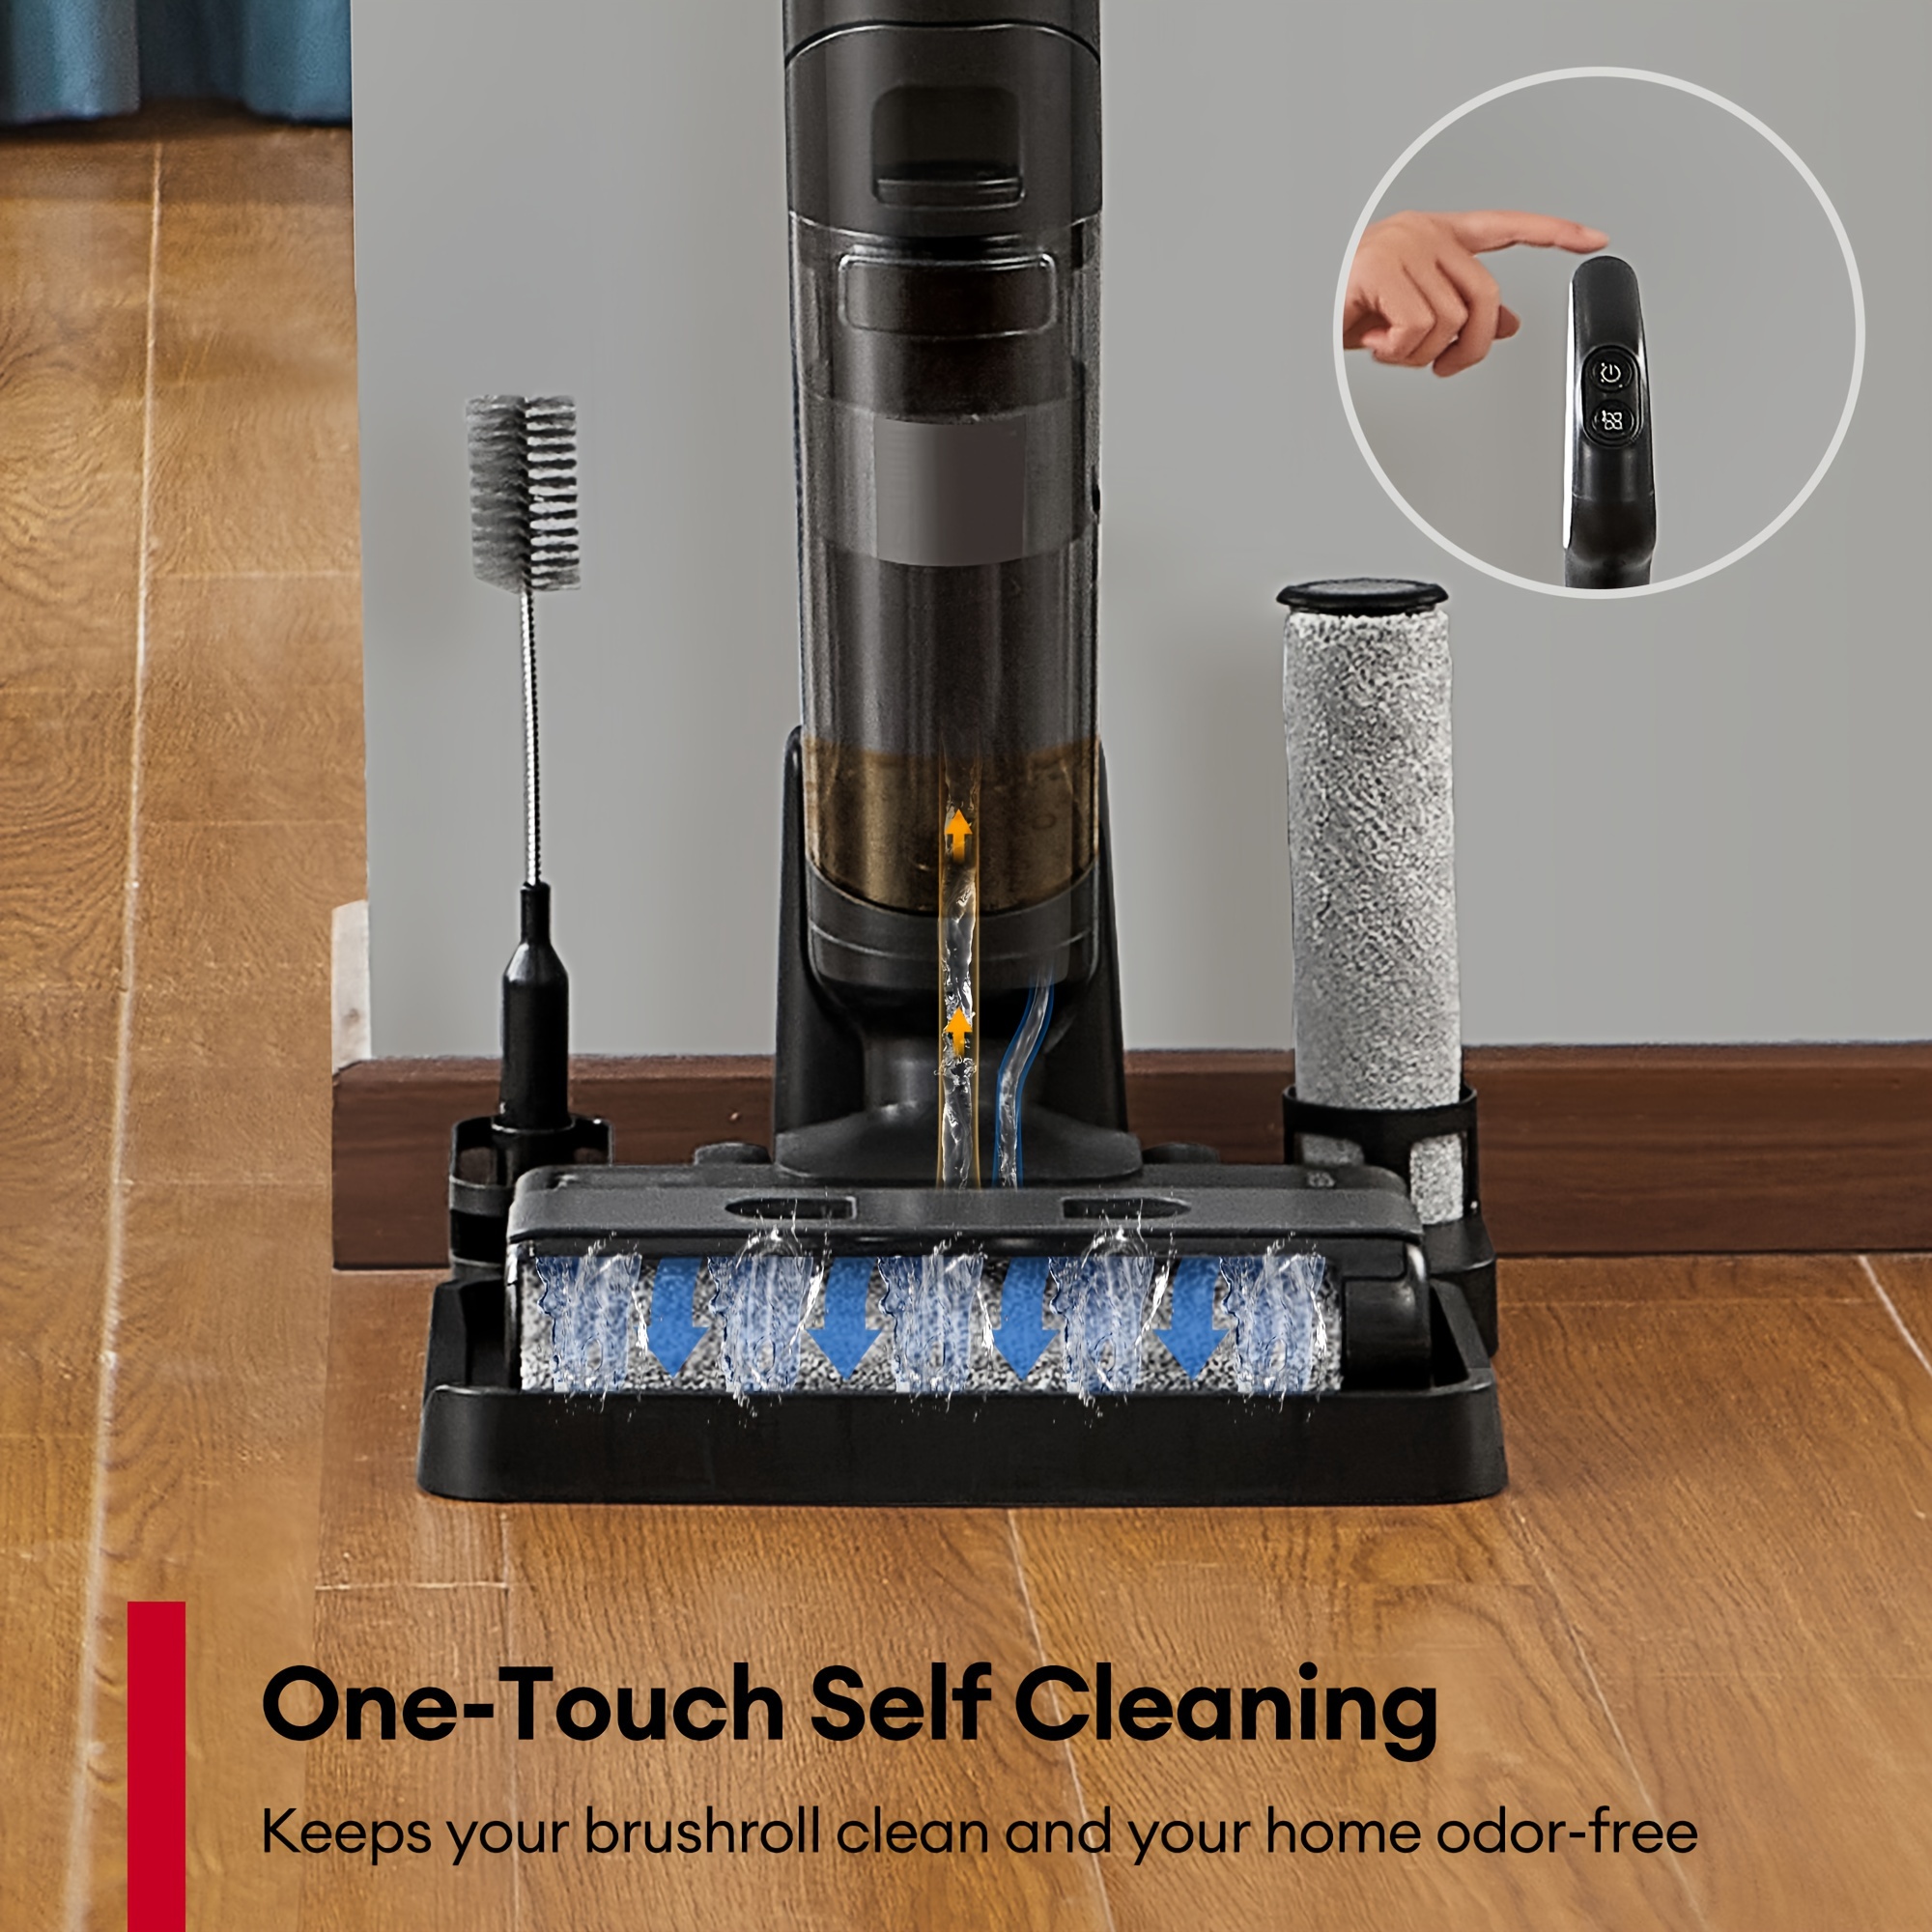 

Cordless Vacuum Mop Combo, Wet Dry Vacuum Cleaner With Self-cleaning, Long Runtime, Smart Mess Detection, Lcd Display, Great For Hard Floors And Sticky Messes, Ac1 Elite